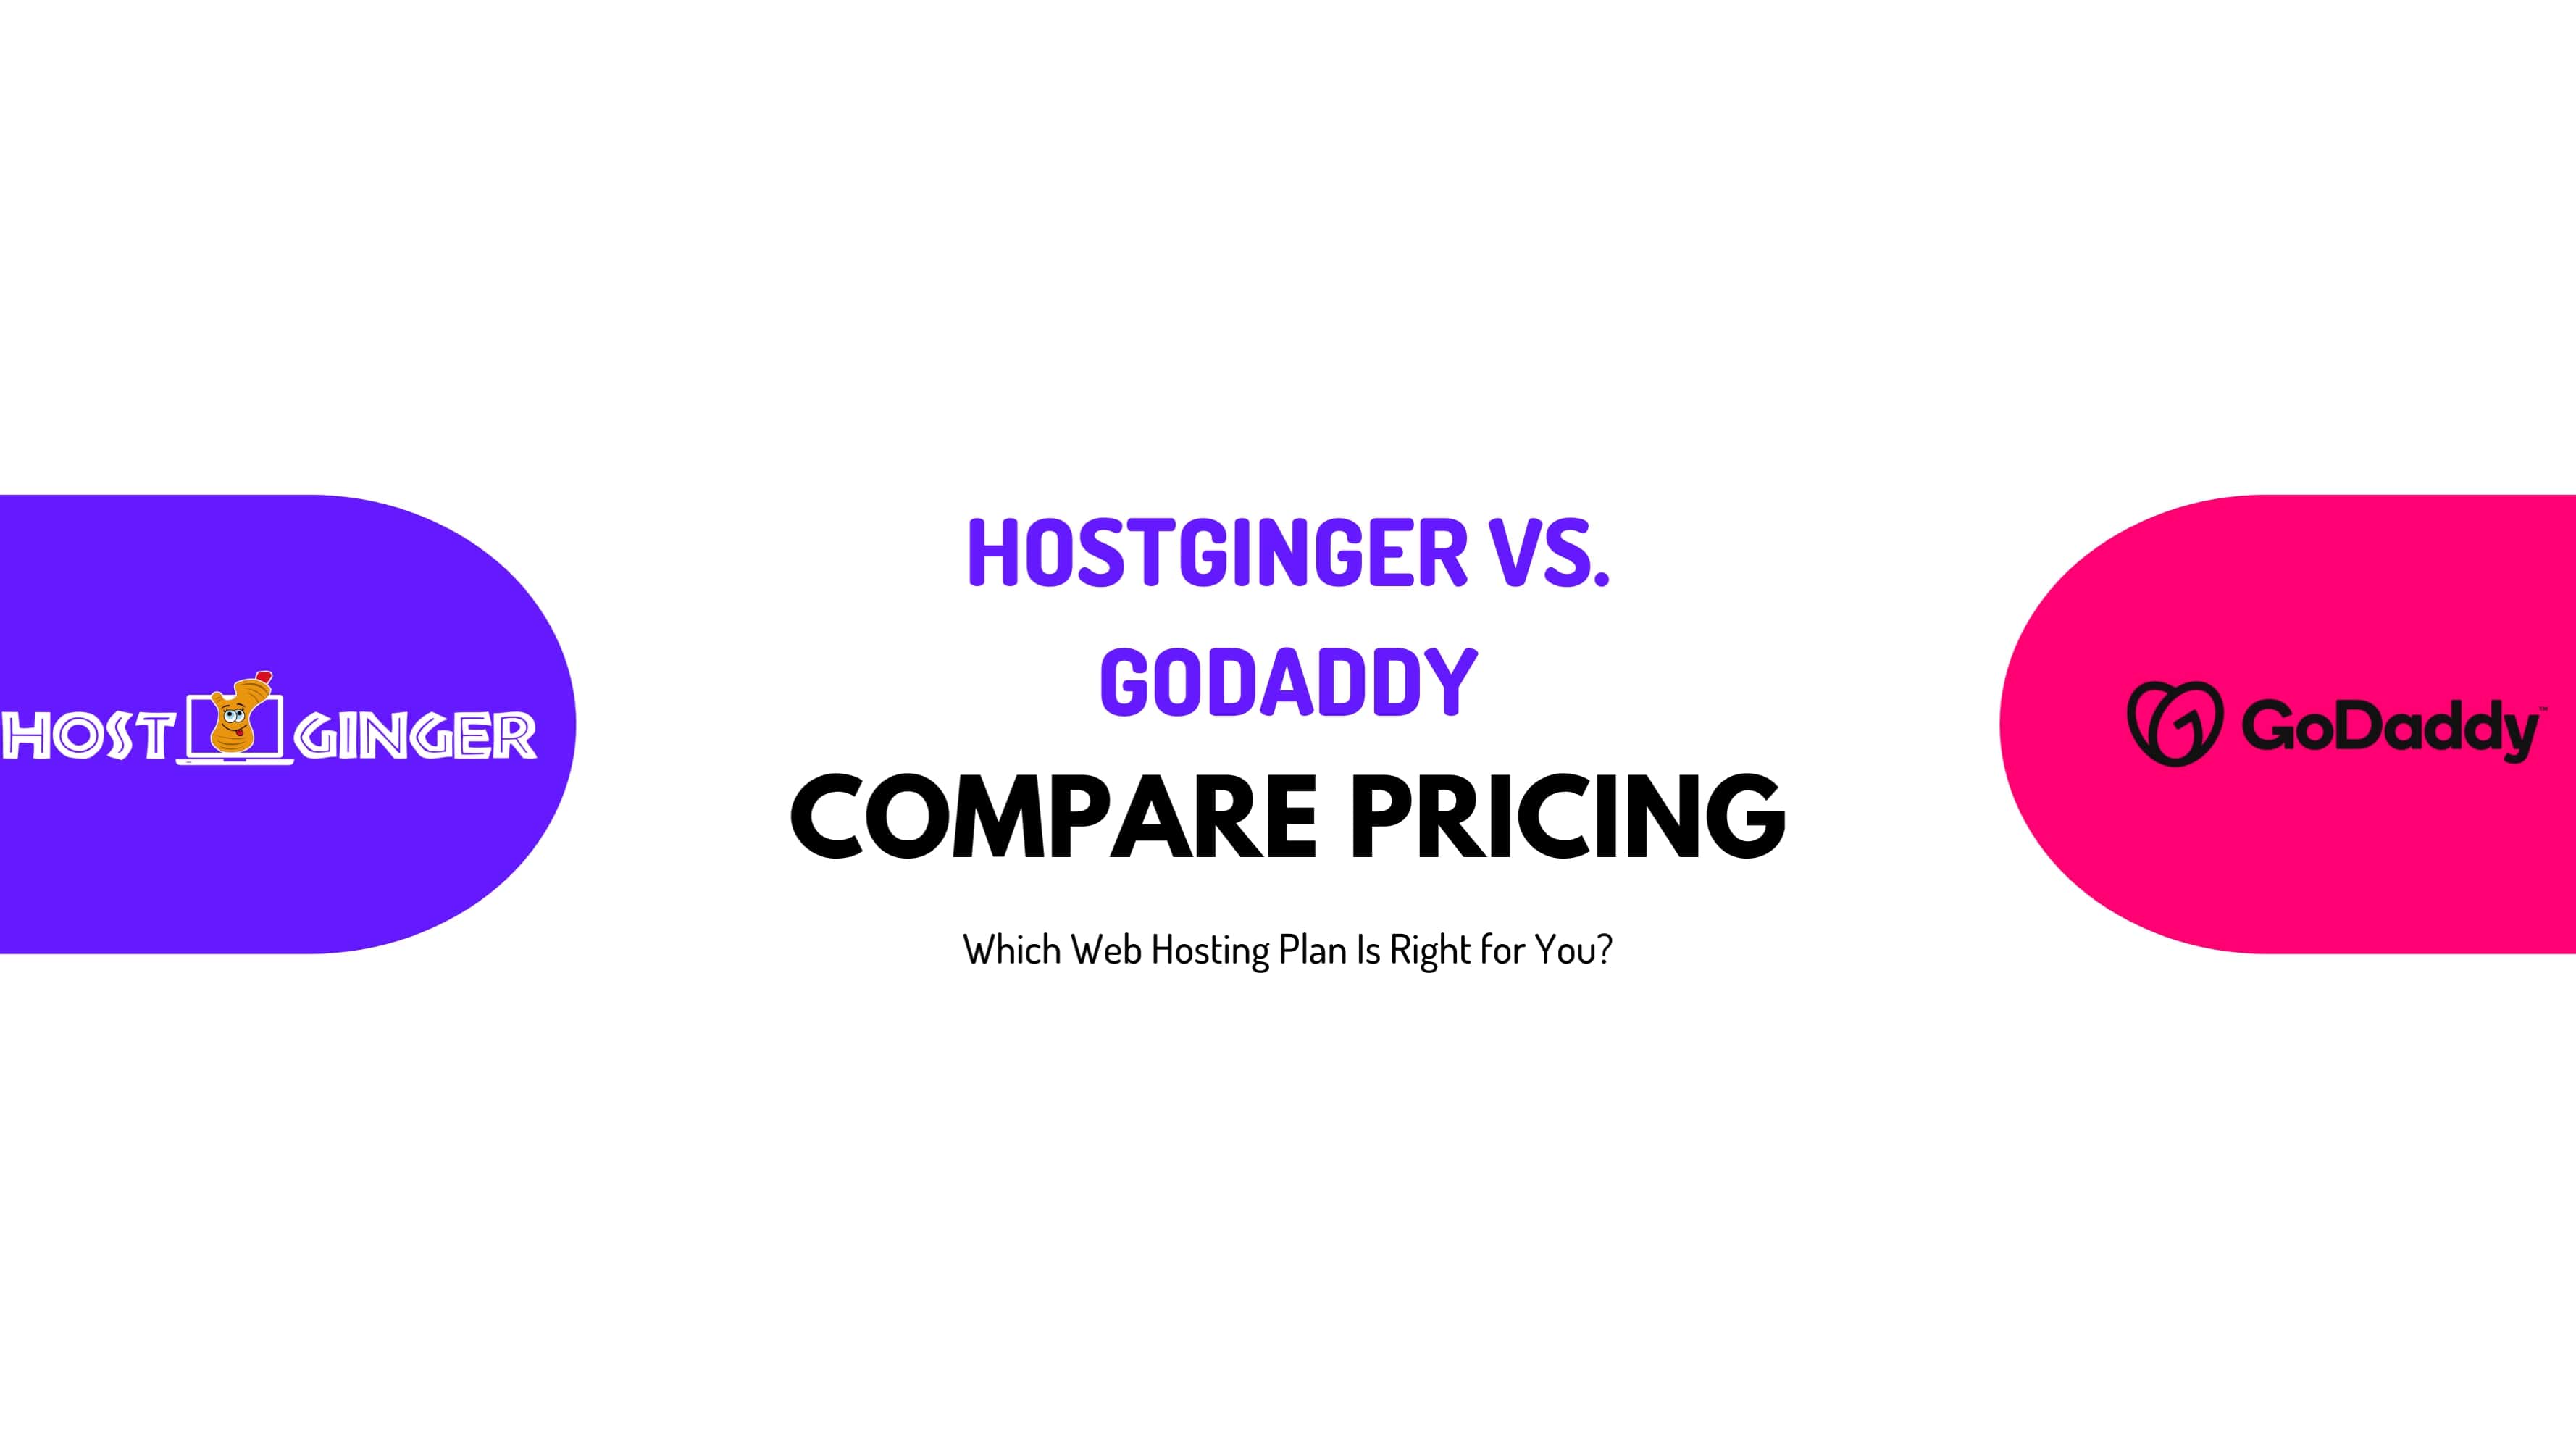 Hostginger vs. GoDaddy - Which Web Hosting Plan Is Right for You